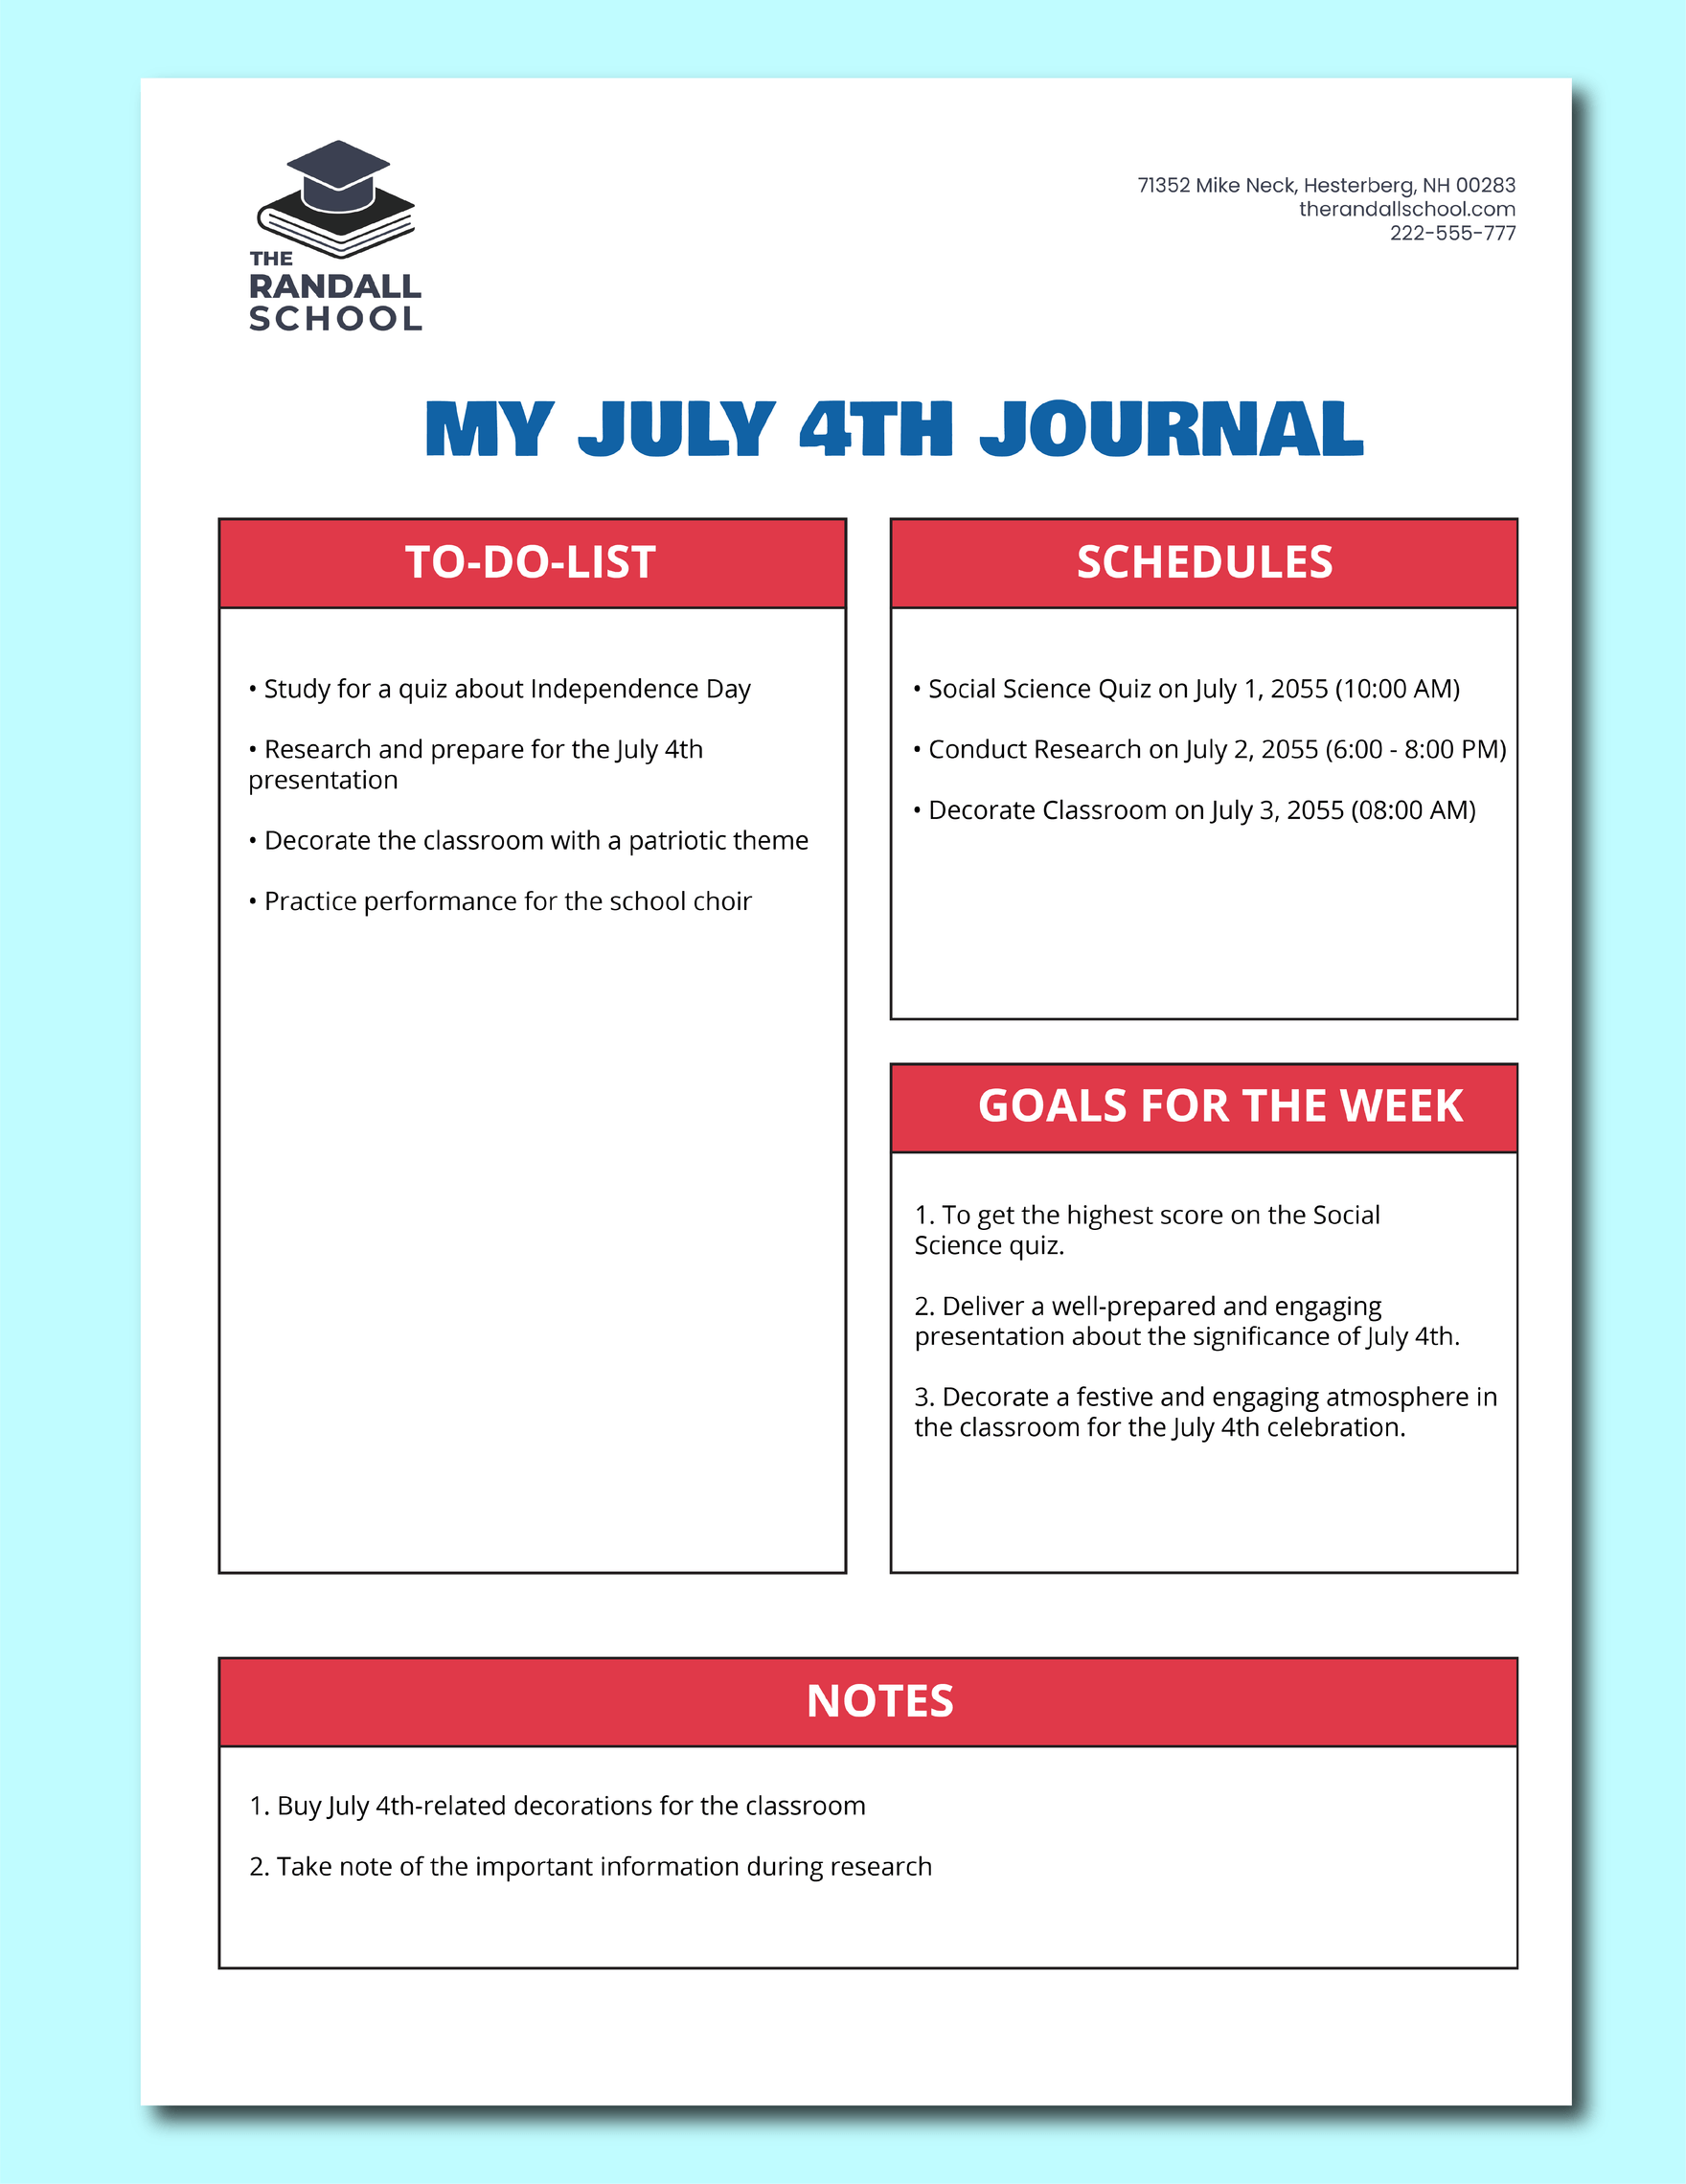 July 4th Journal